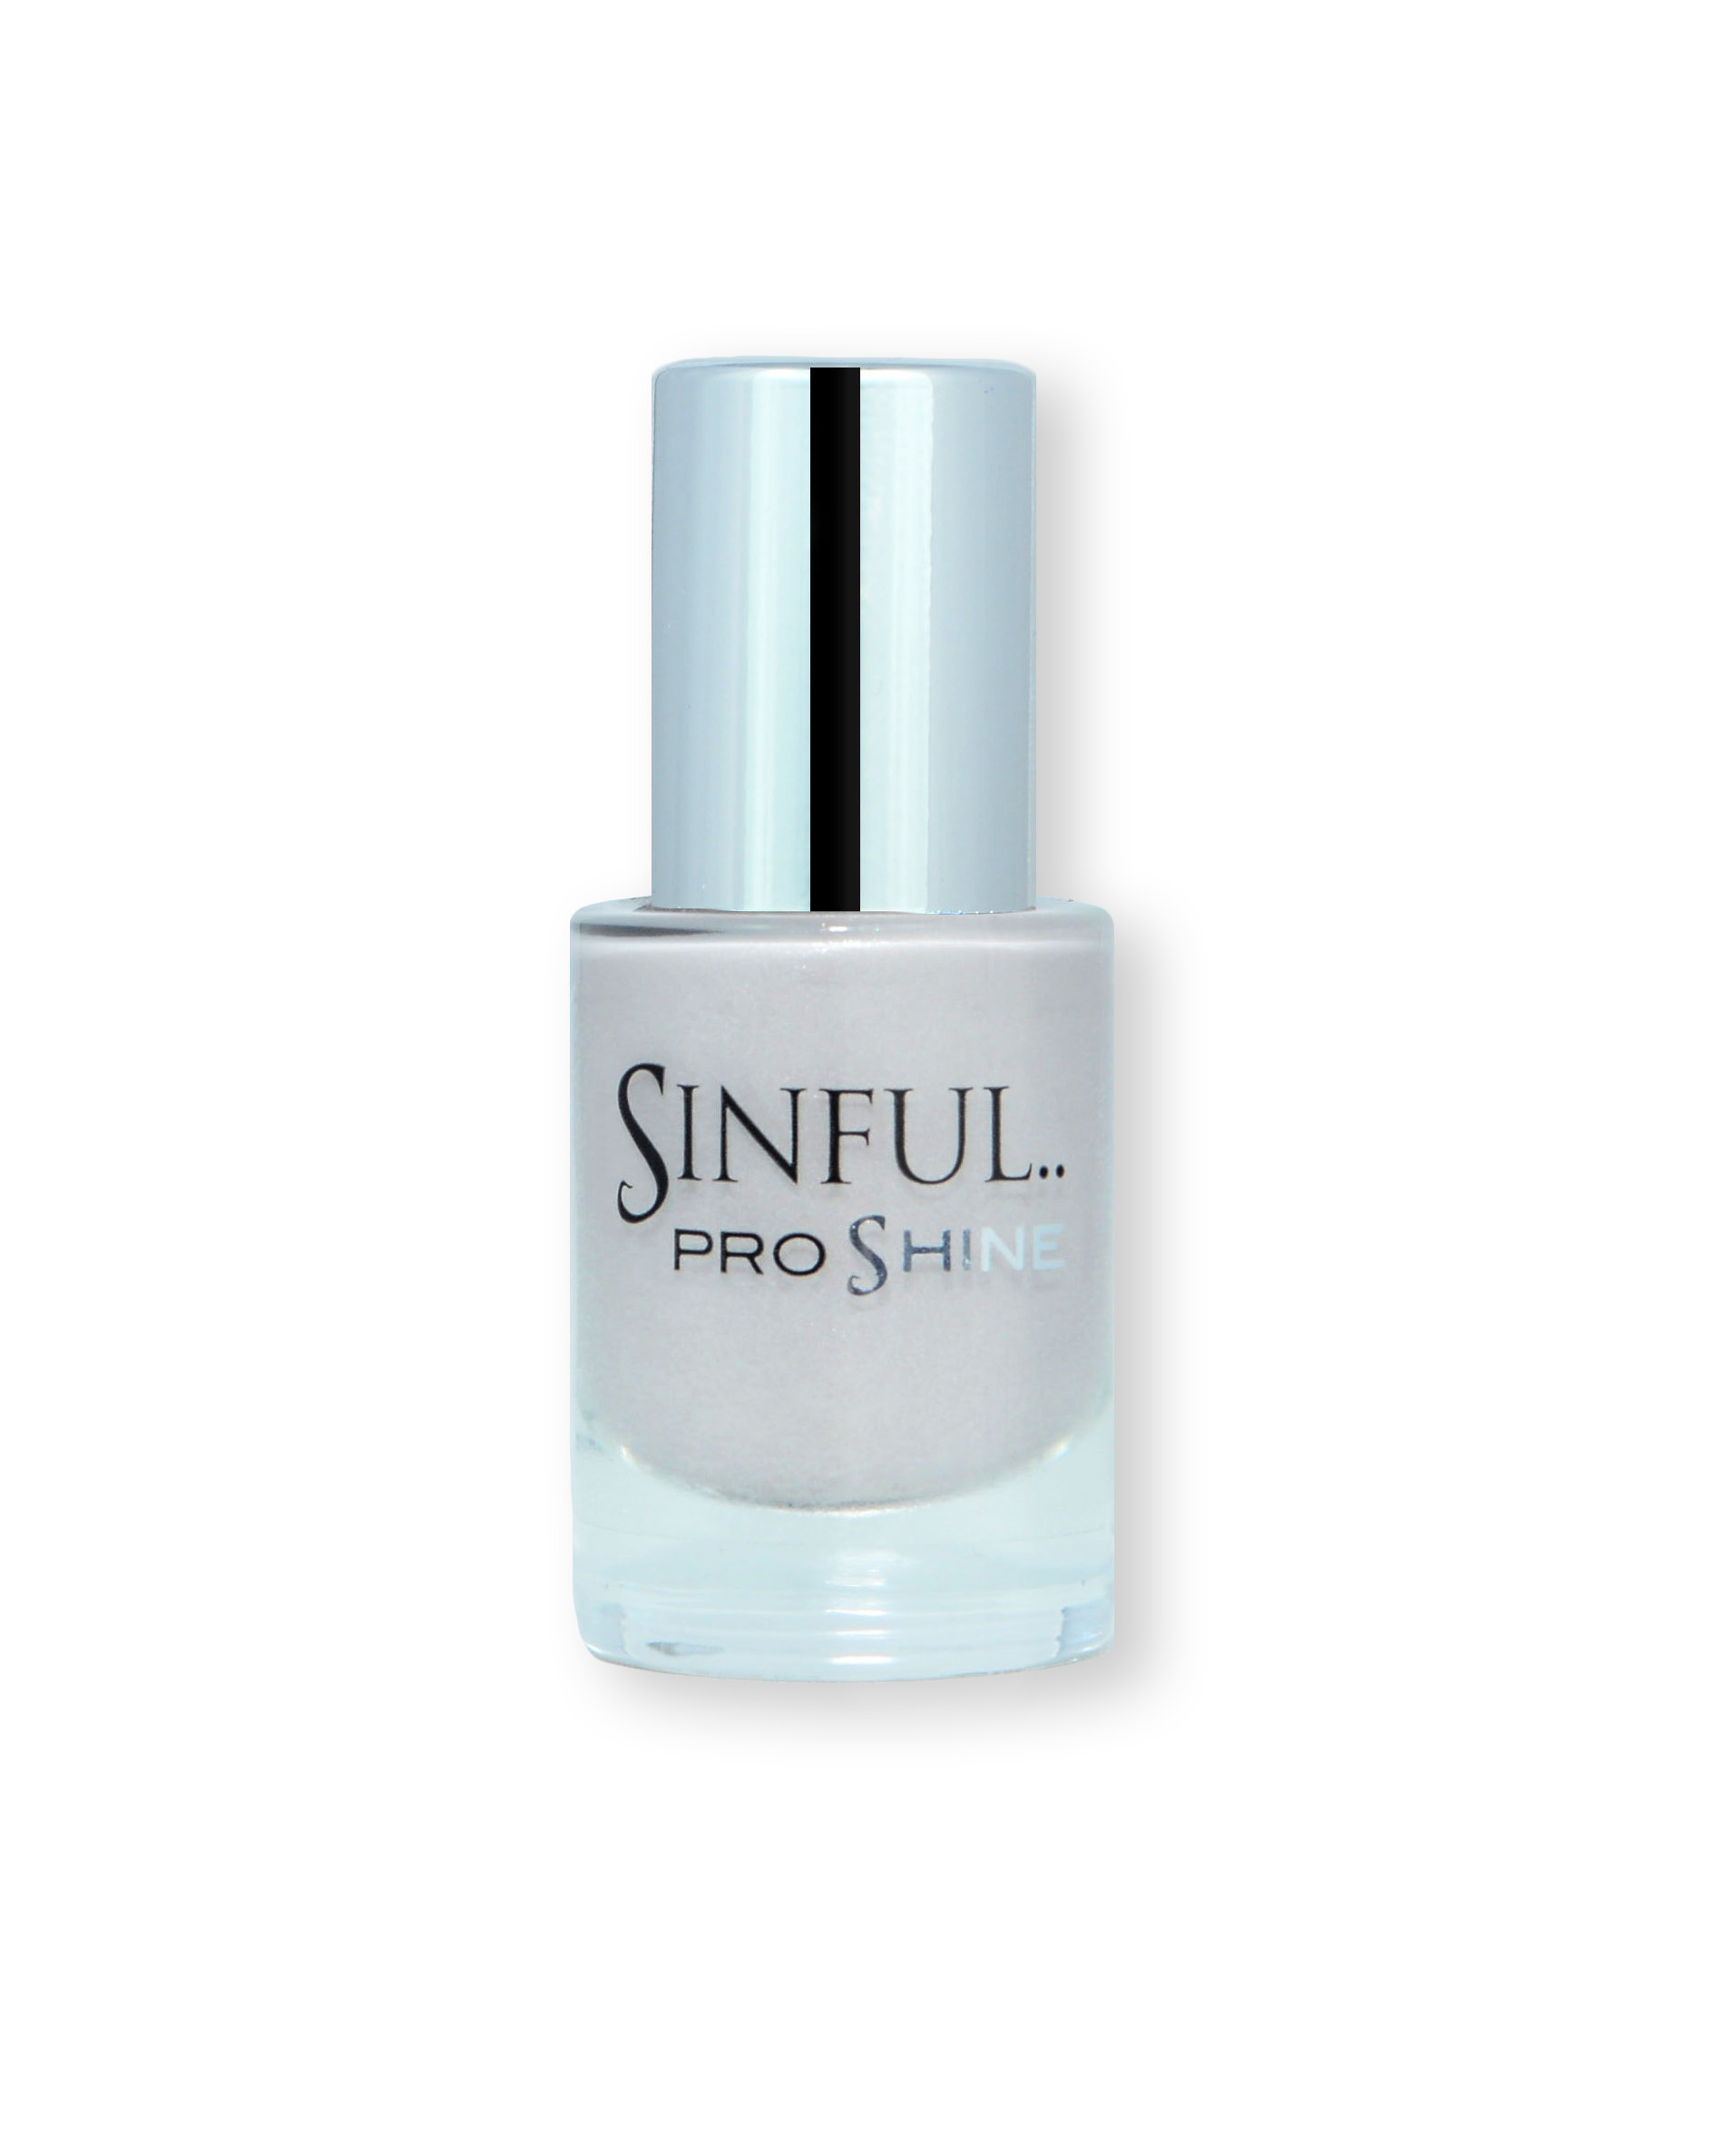 Sinful PROshine is a revolution into top spec imitation gel-like formula, easy application, full coverage and a sleek finish. Spoil yourself with the choice of 42 shades, expertly formulated with the finest grade of pigments. Negligee: Grey nude with a subtle shimmer